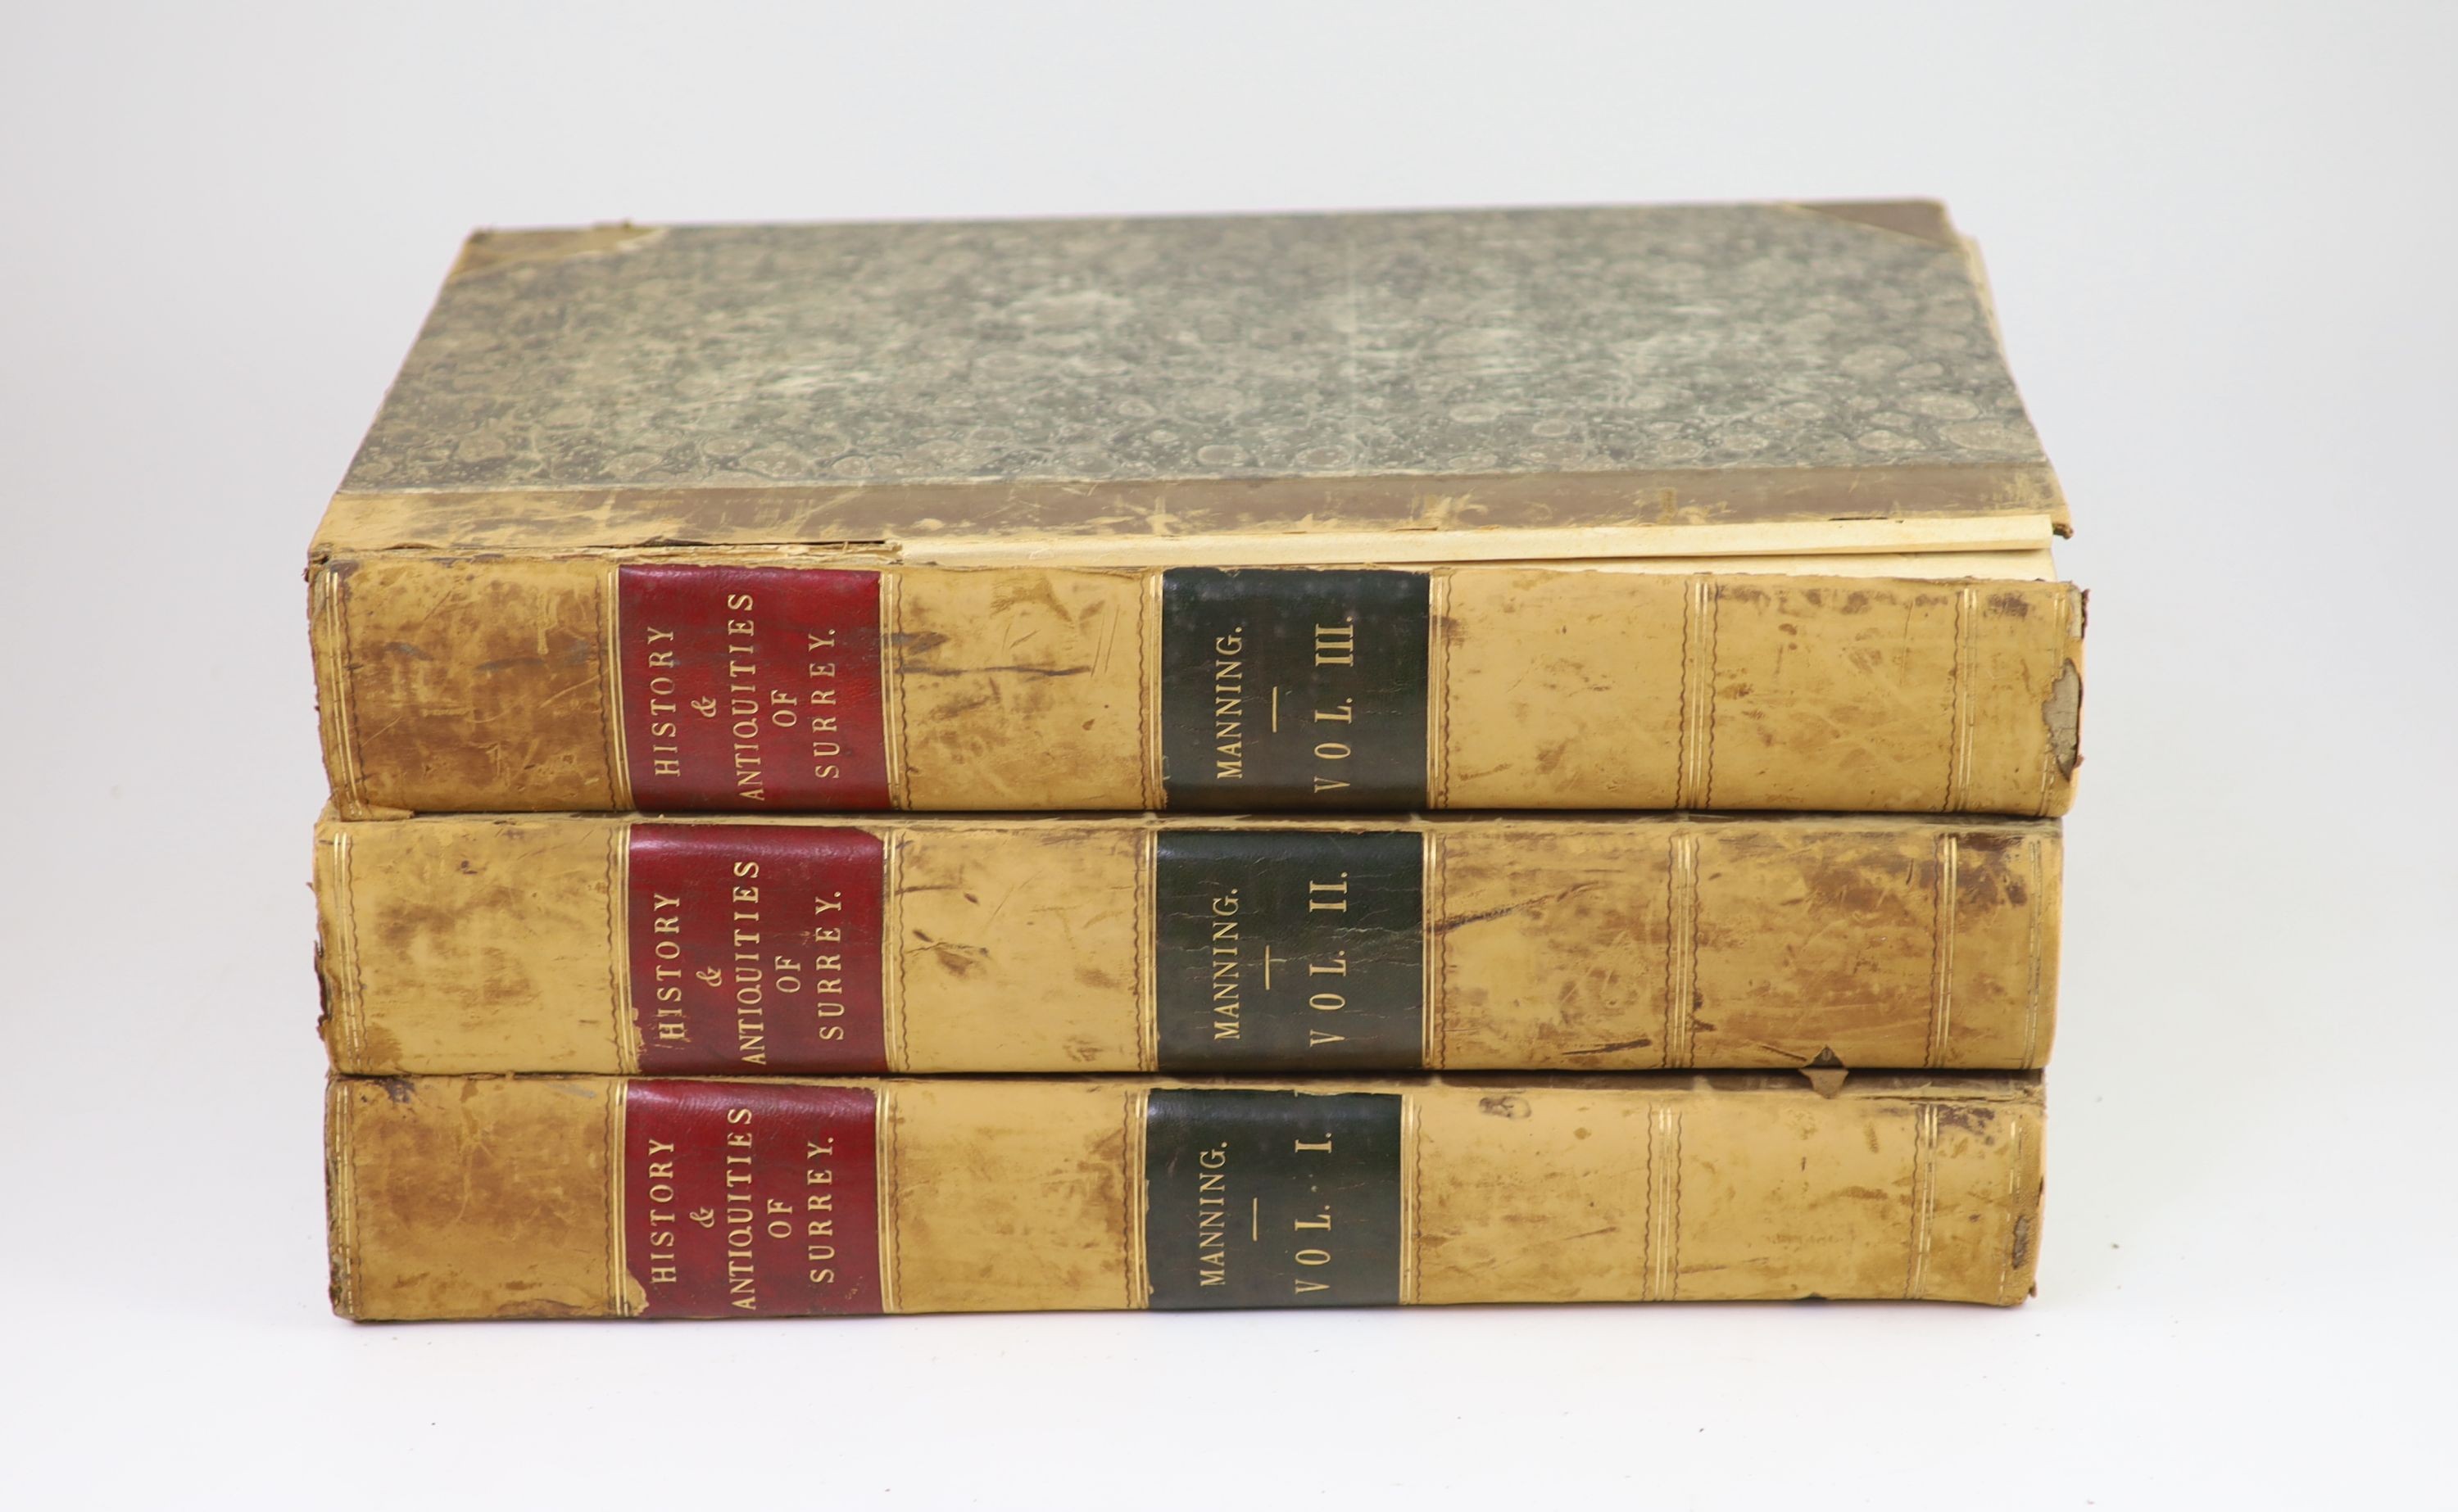 Manning, Owen and Bray, William- The History and Antiquities of the County of Surrey, 3 vols, 1st edition, folio, contemporary half calf with later gilt labels, with 2 folded maps, folded tables and 84 plates (including